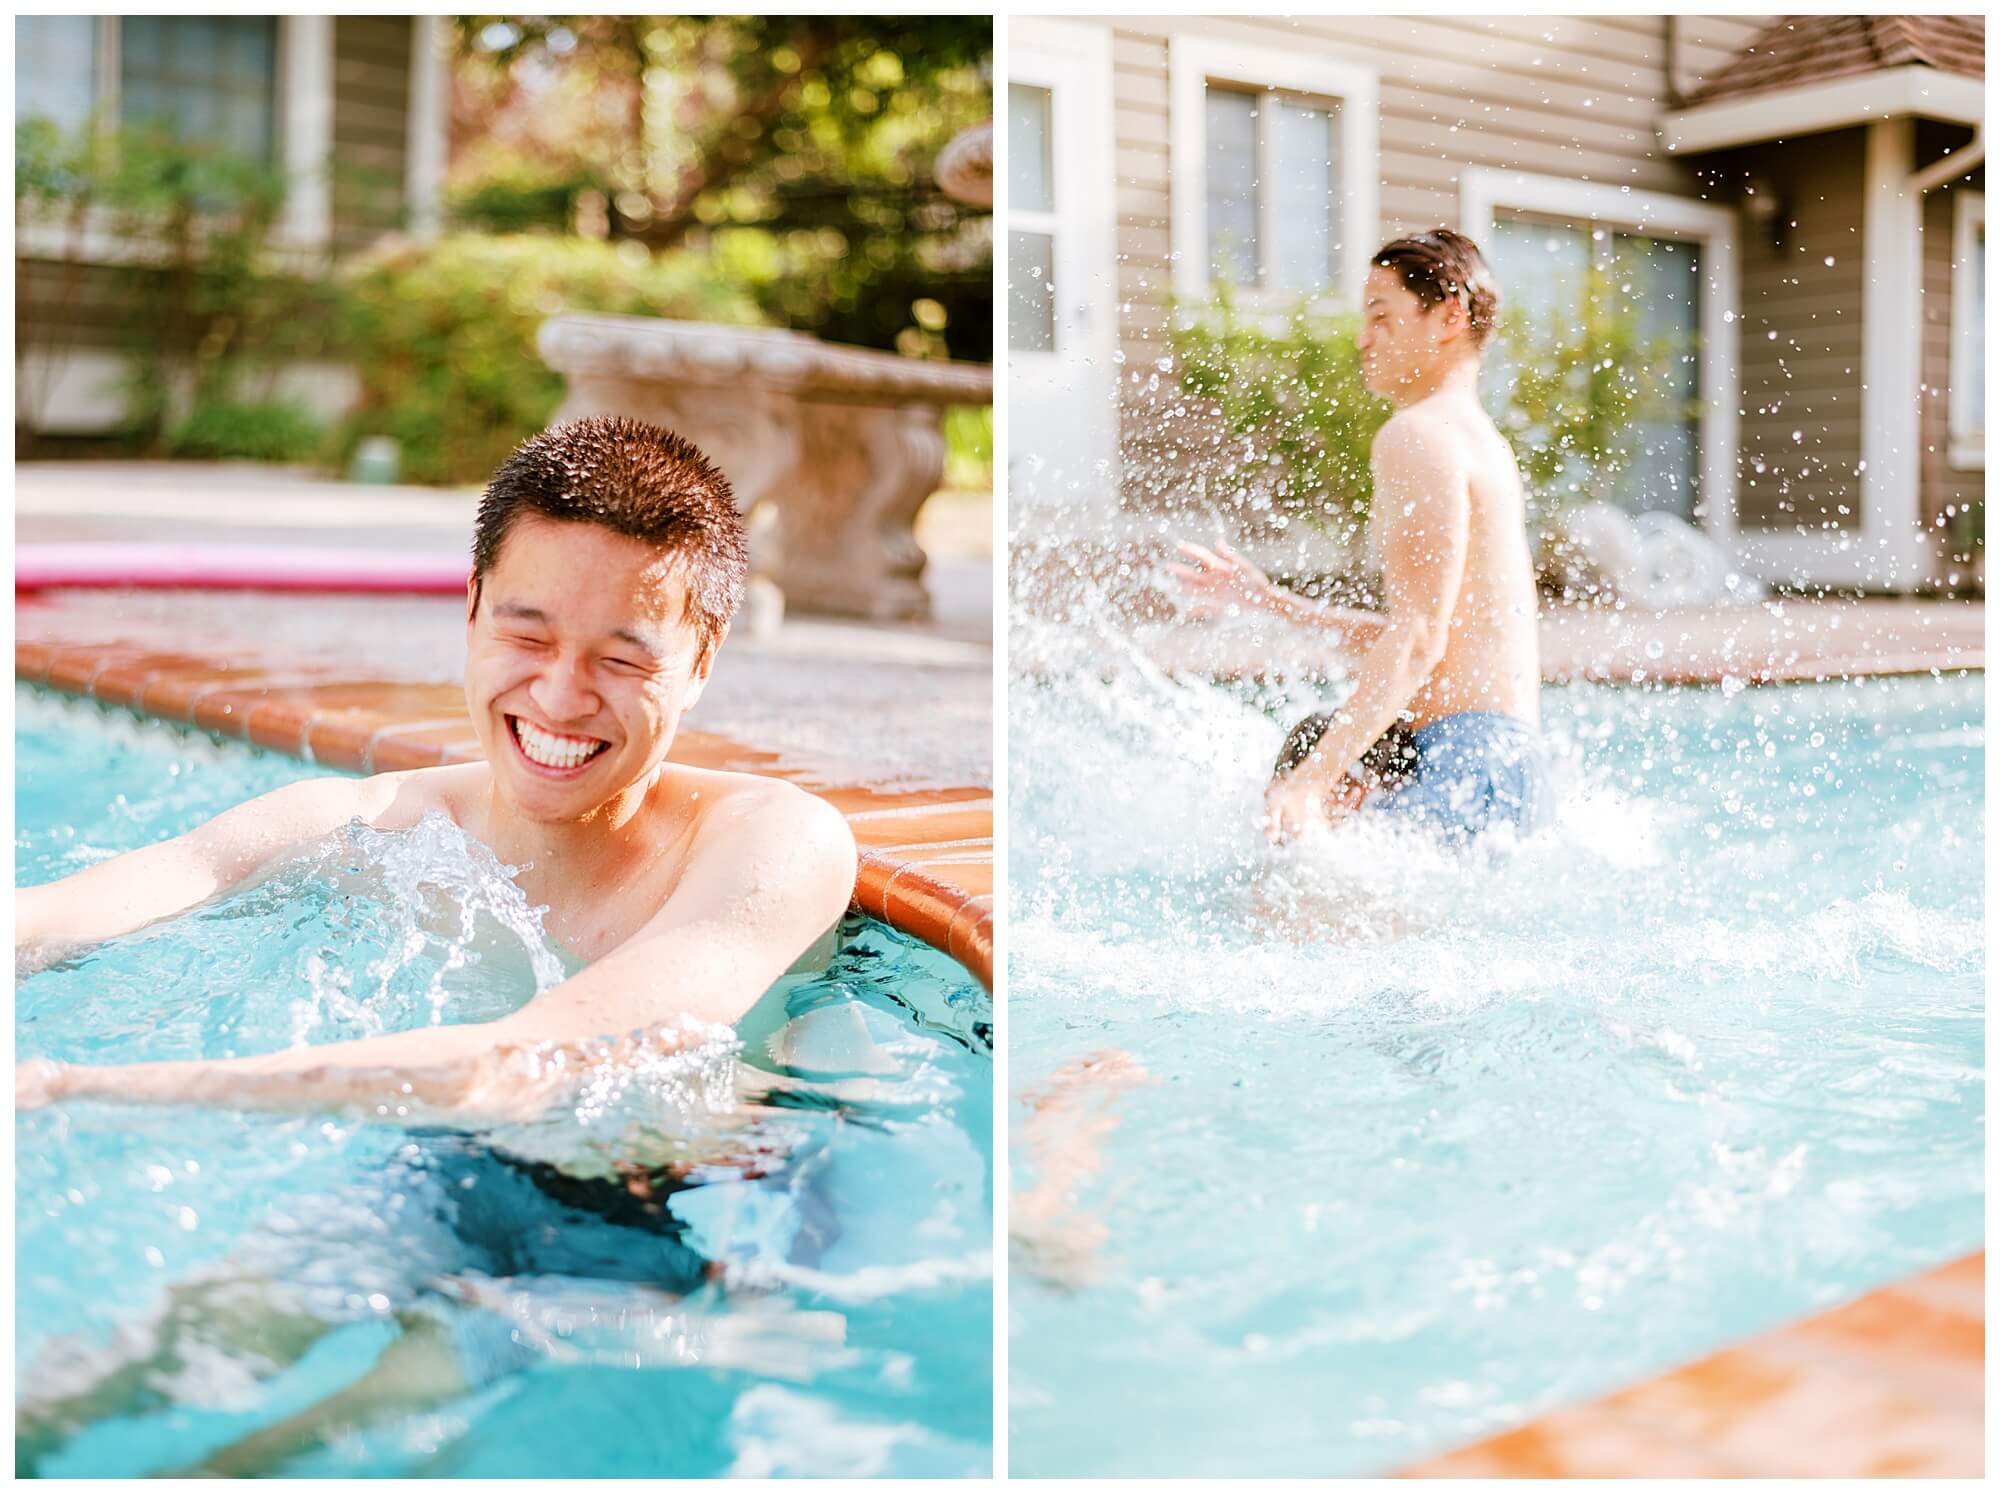 Bay Area portrait photography family lifestyle session in a backyard pool.